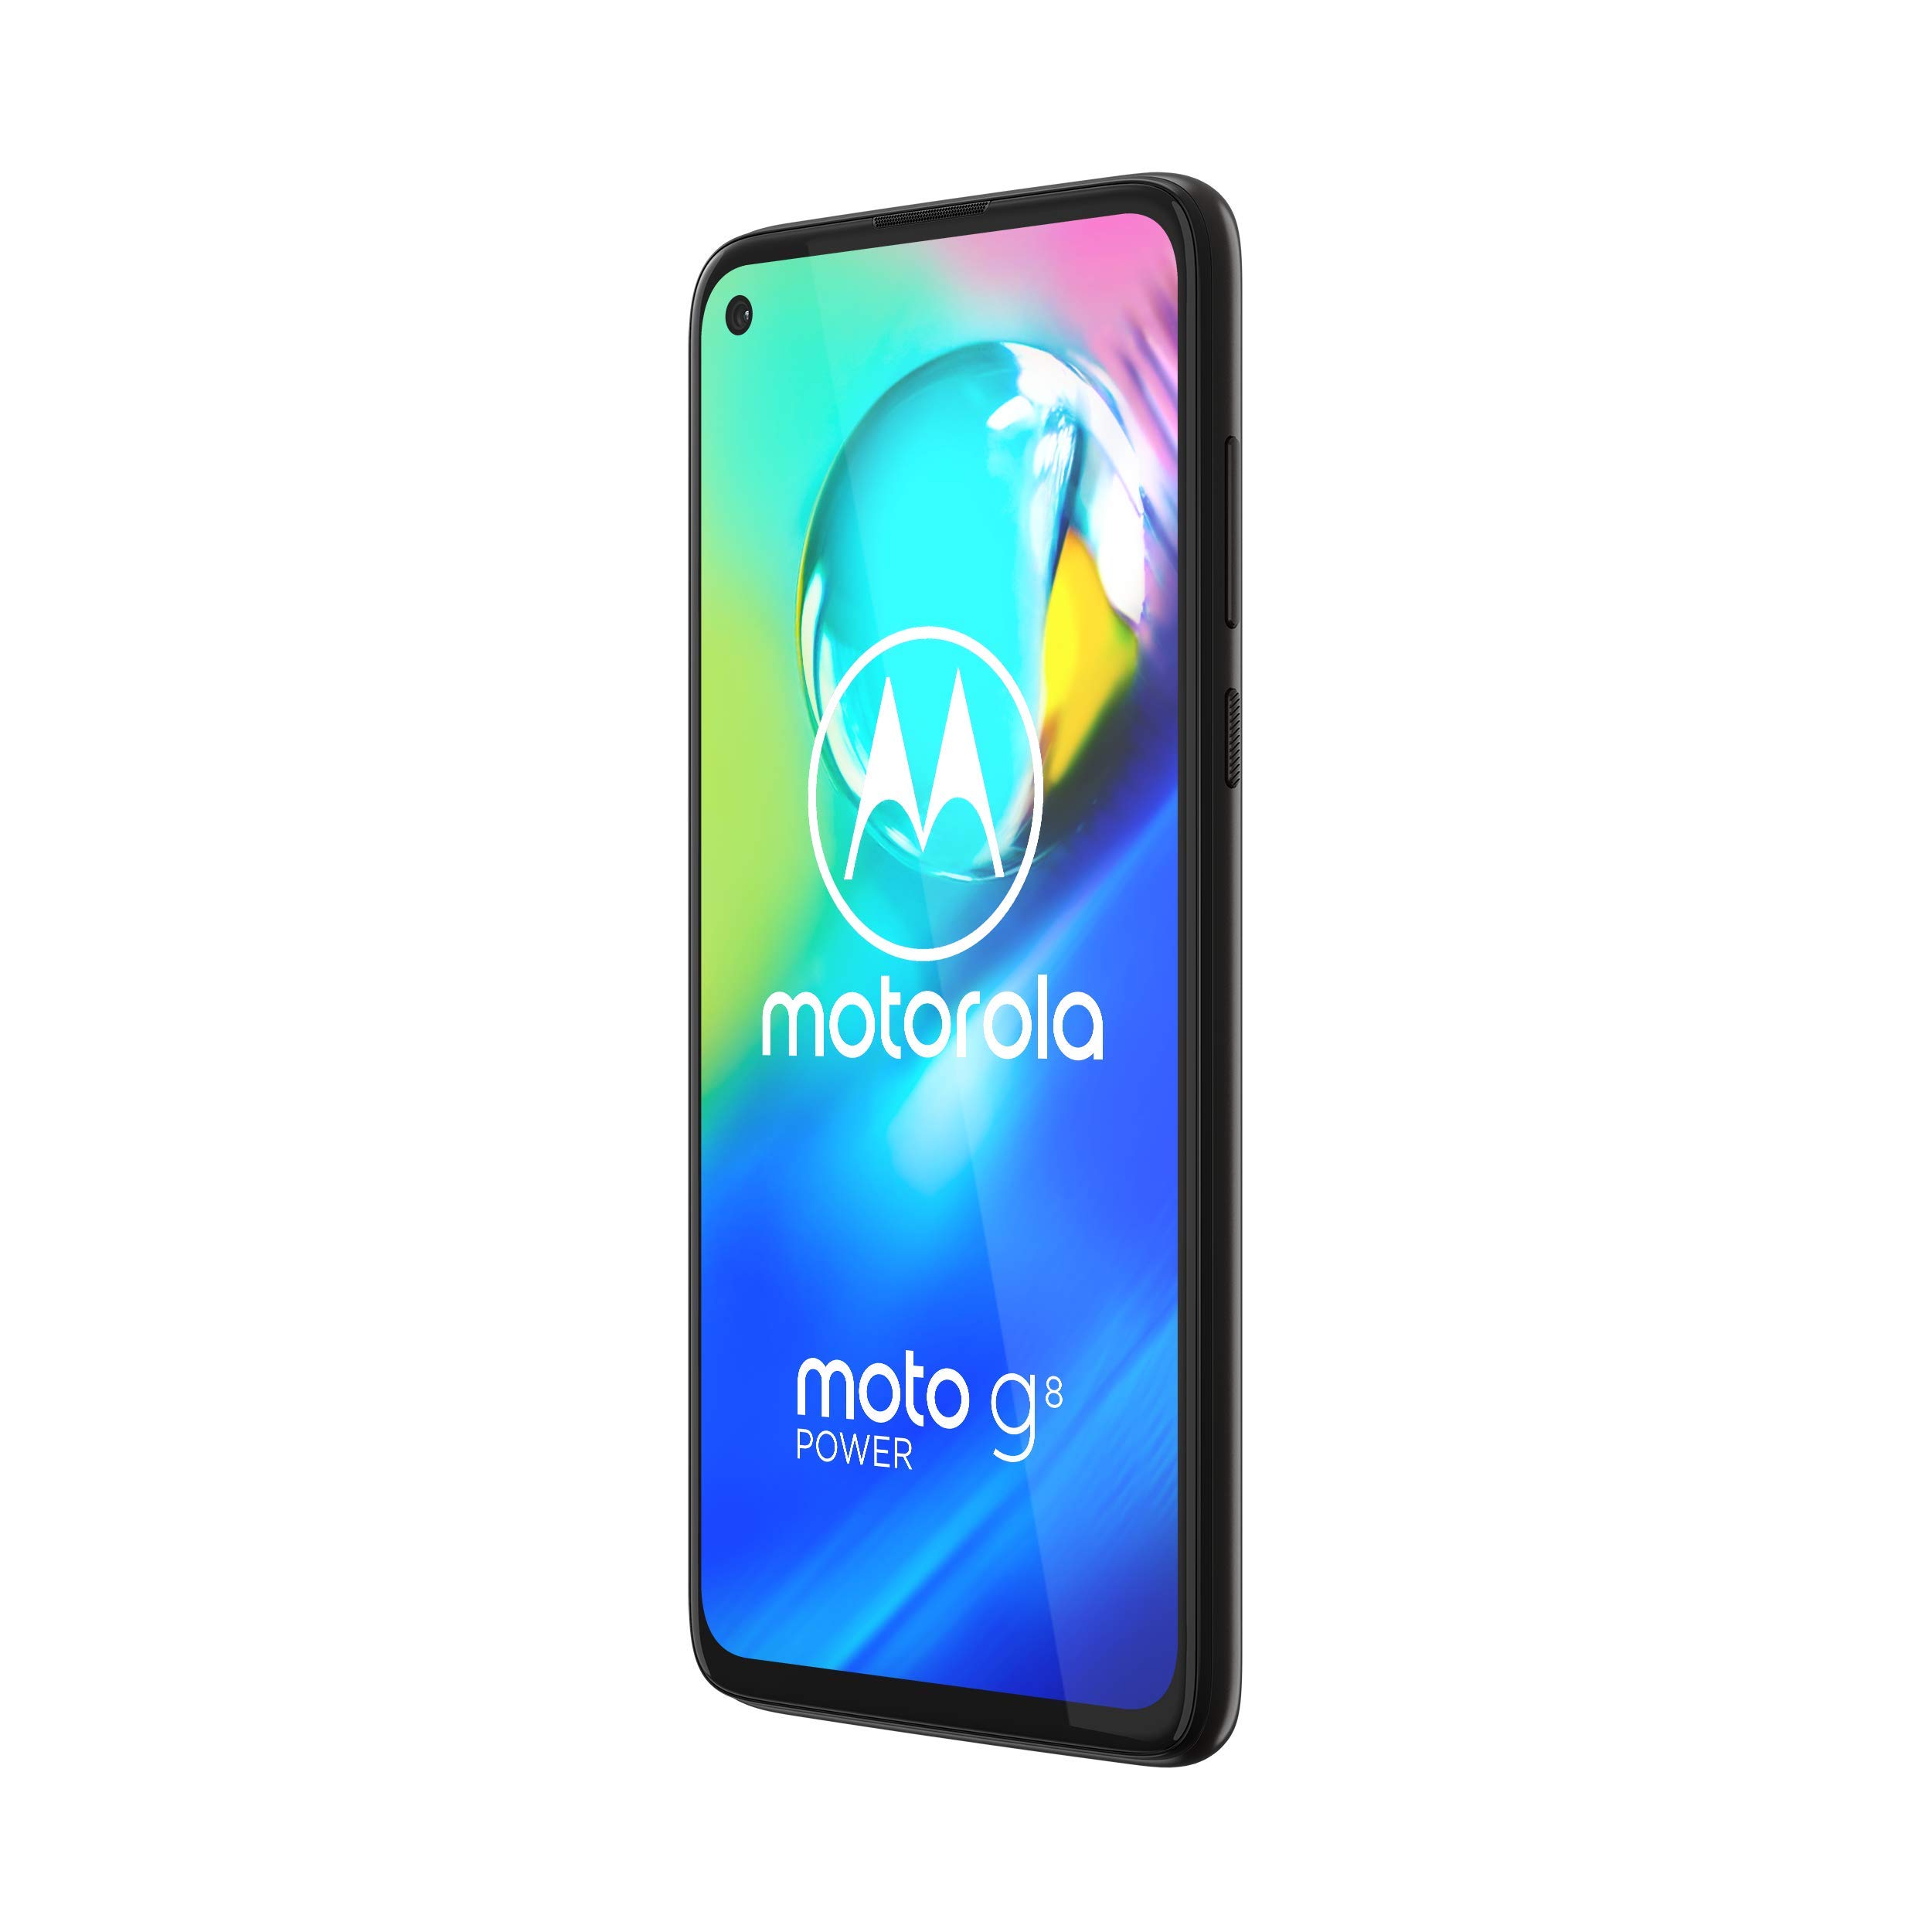 Moto G8 Power | Unlocked | International GSM Only | 4/64GB | 16MP Camera | 2020 | Black | NOT compatible with Sprint or Verizon